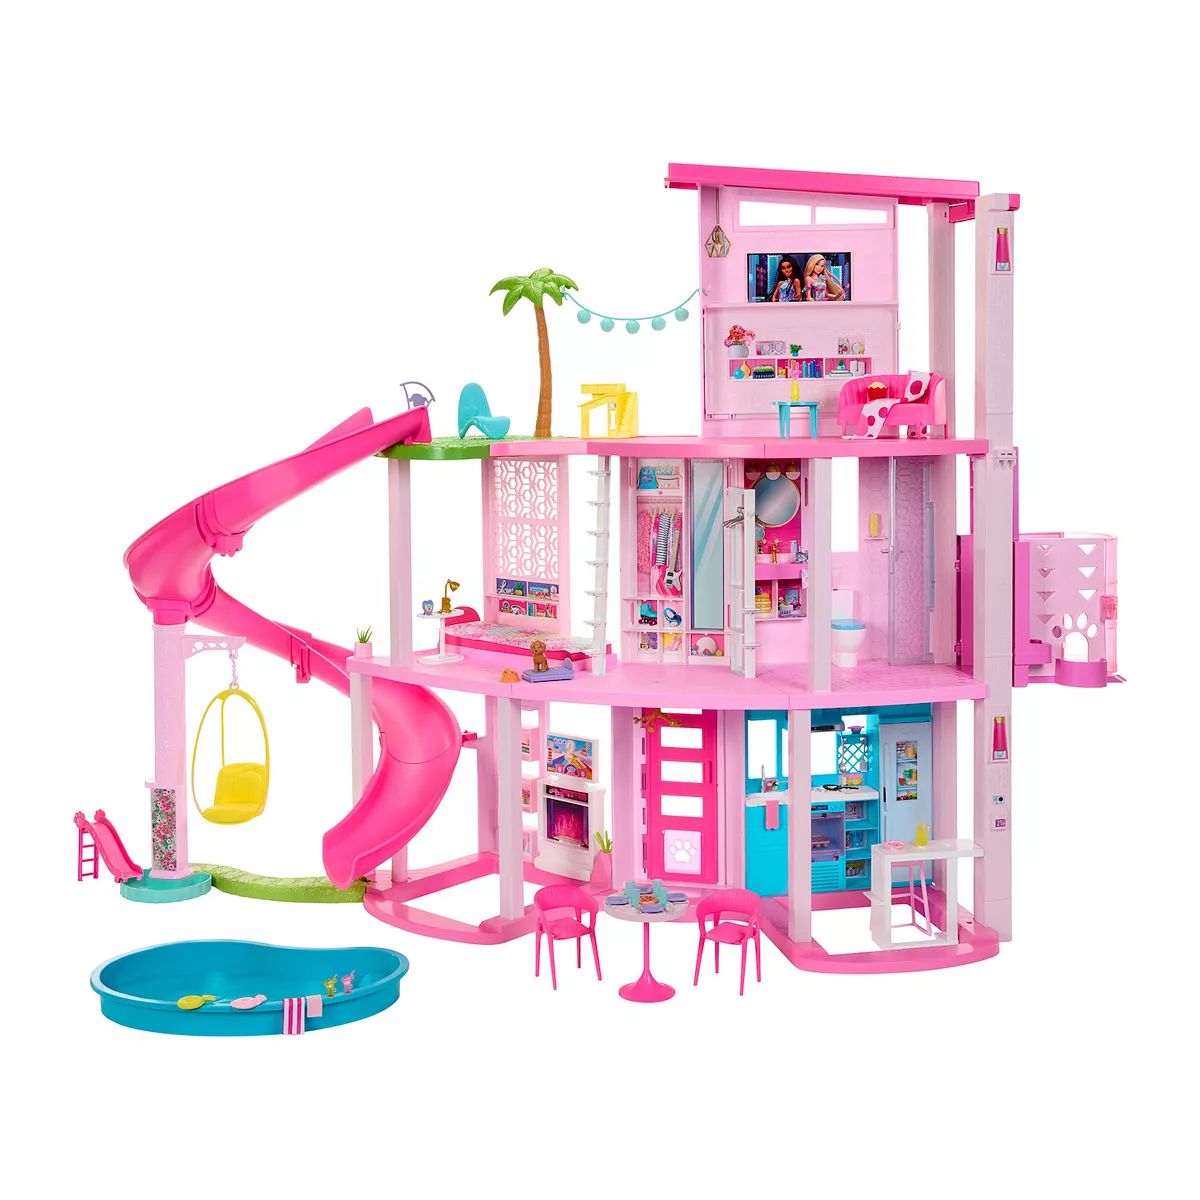 Barbie Dreamhouse Pool Party Doll House with 3 Story Slide | Kohl's